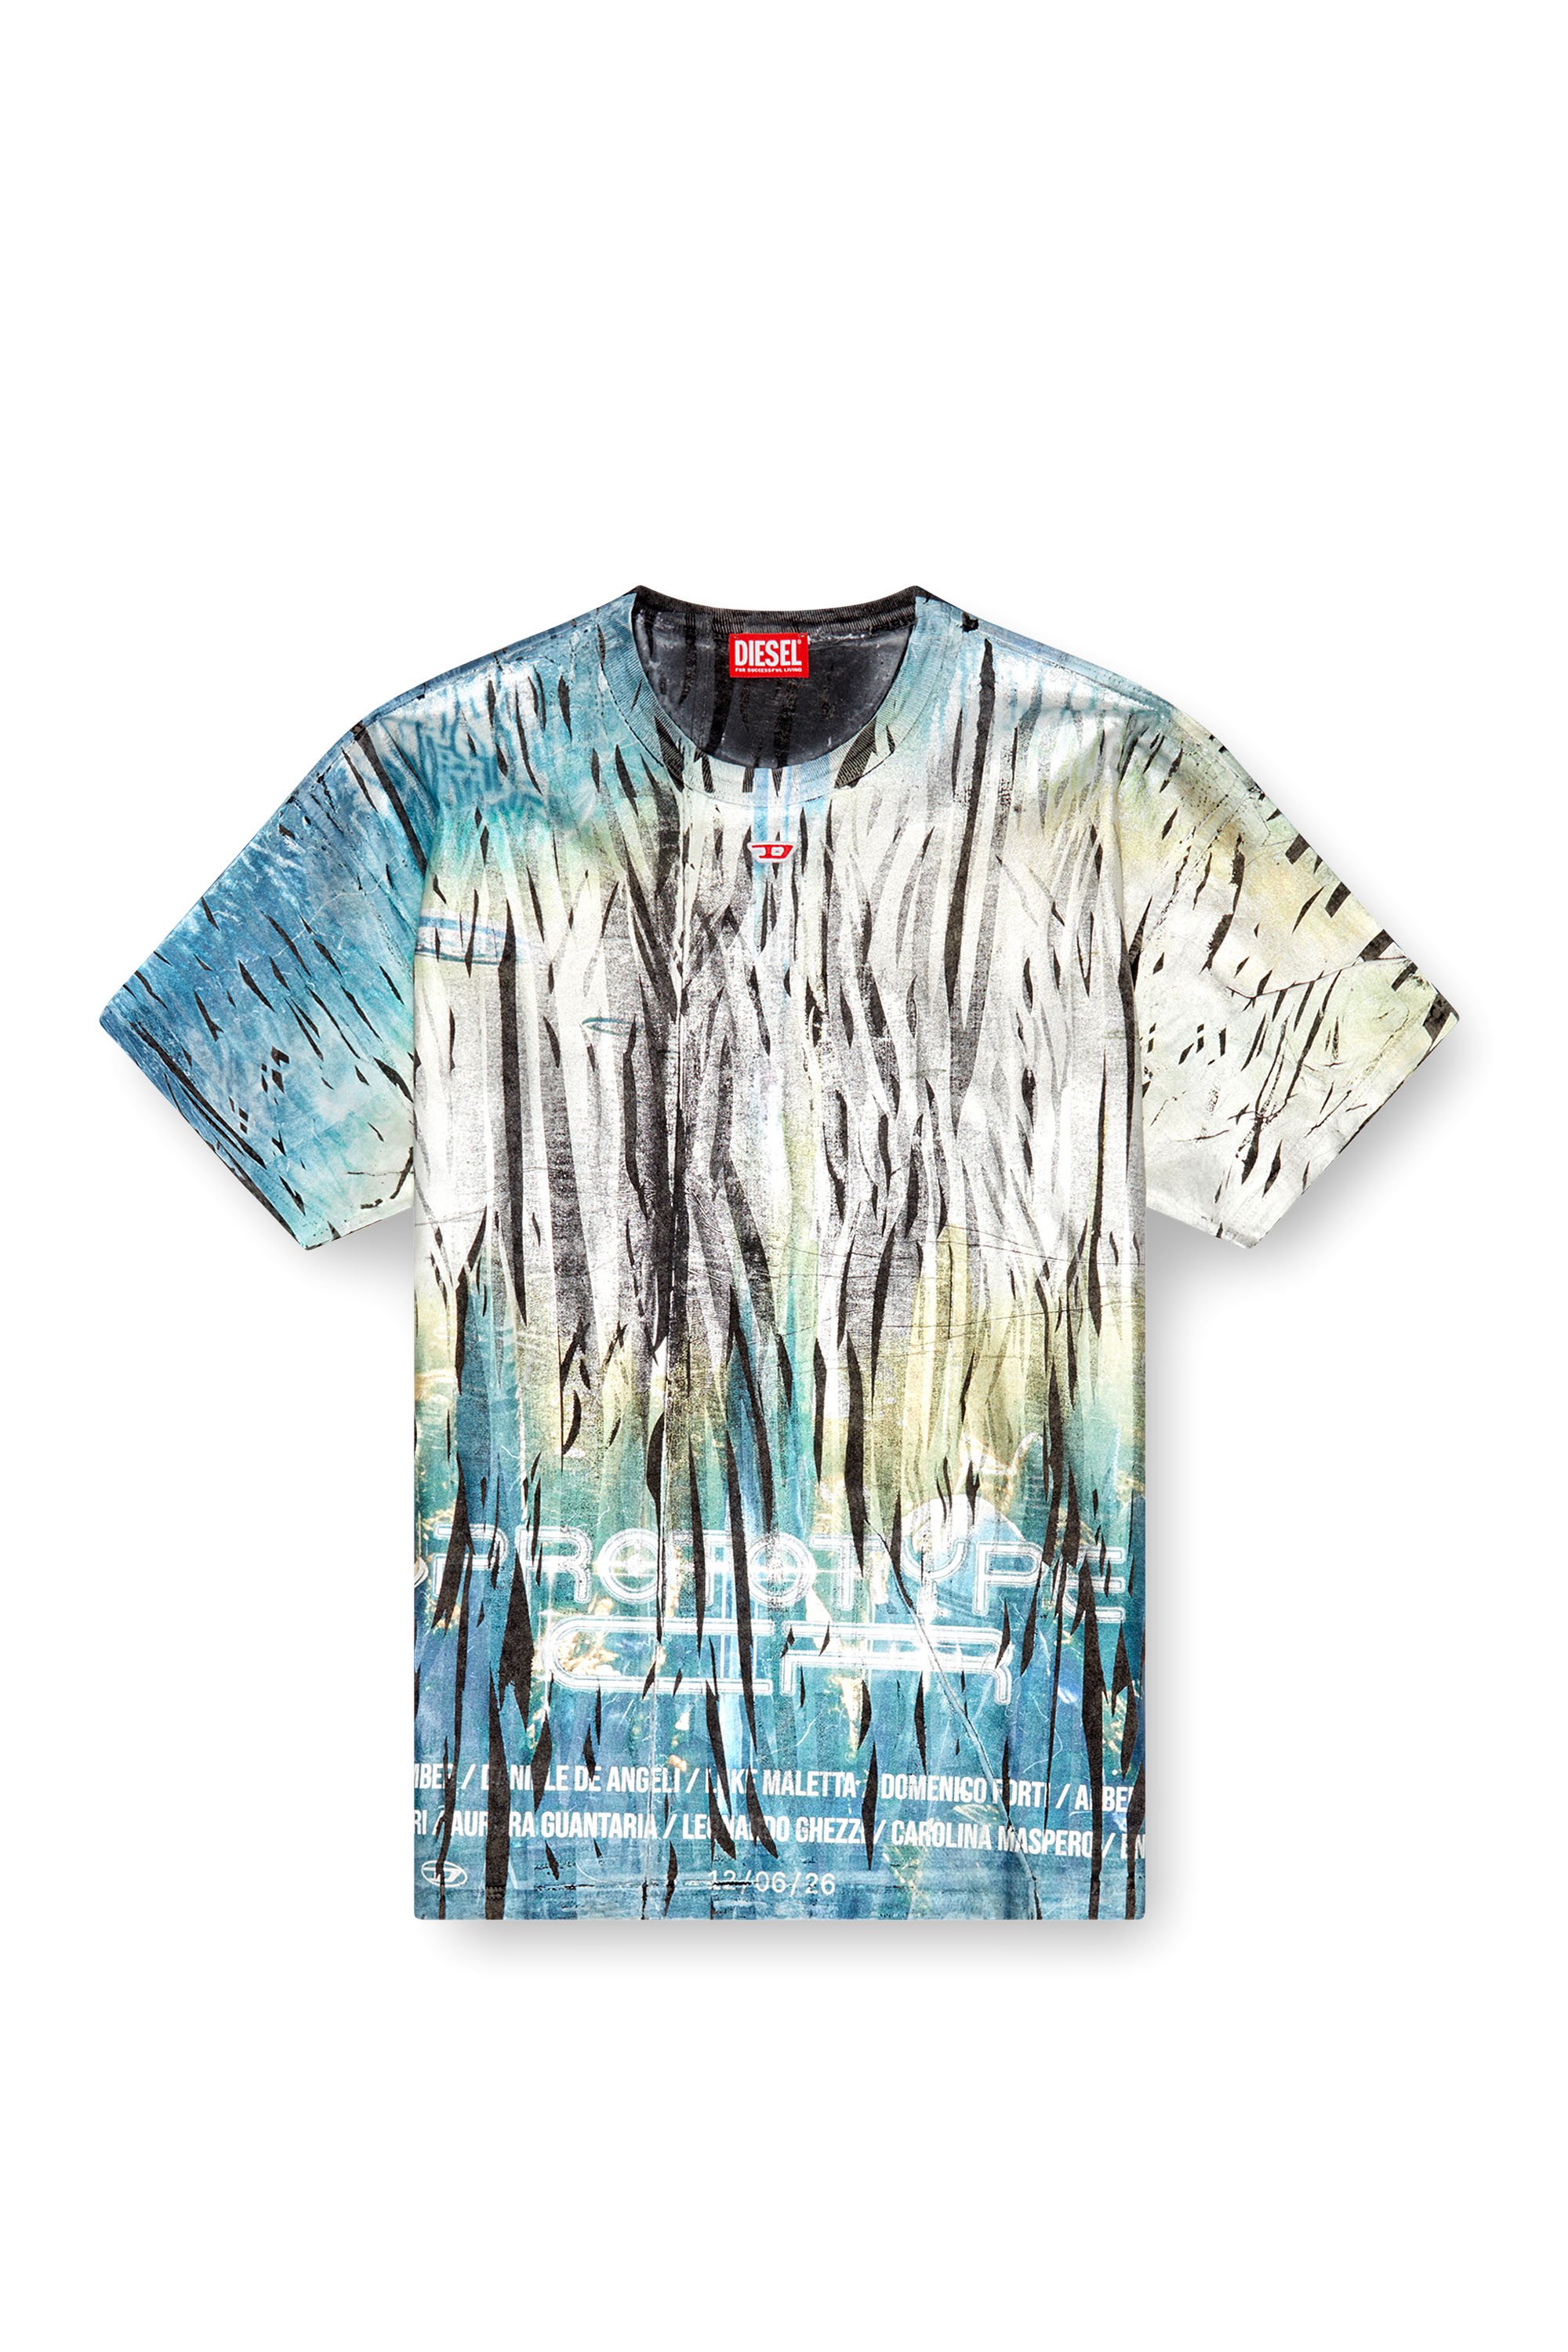 Diesel - T-BORD-Q1, Man T-shirt with creased foil treatment in Multicolor - Image 3